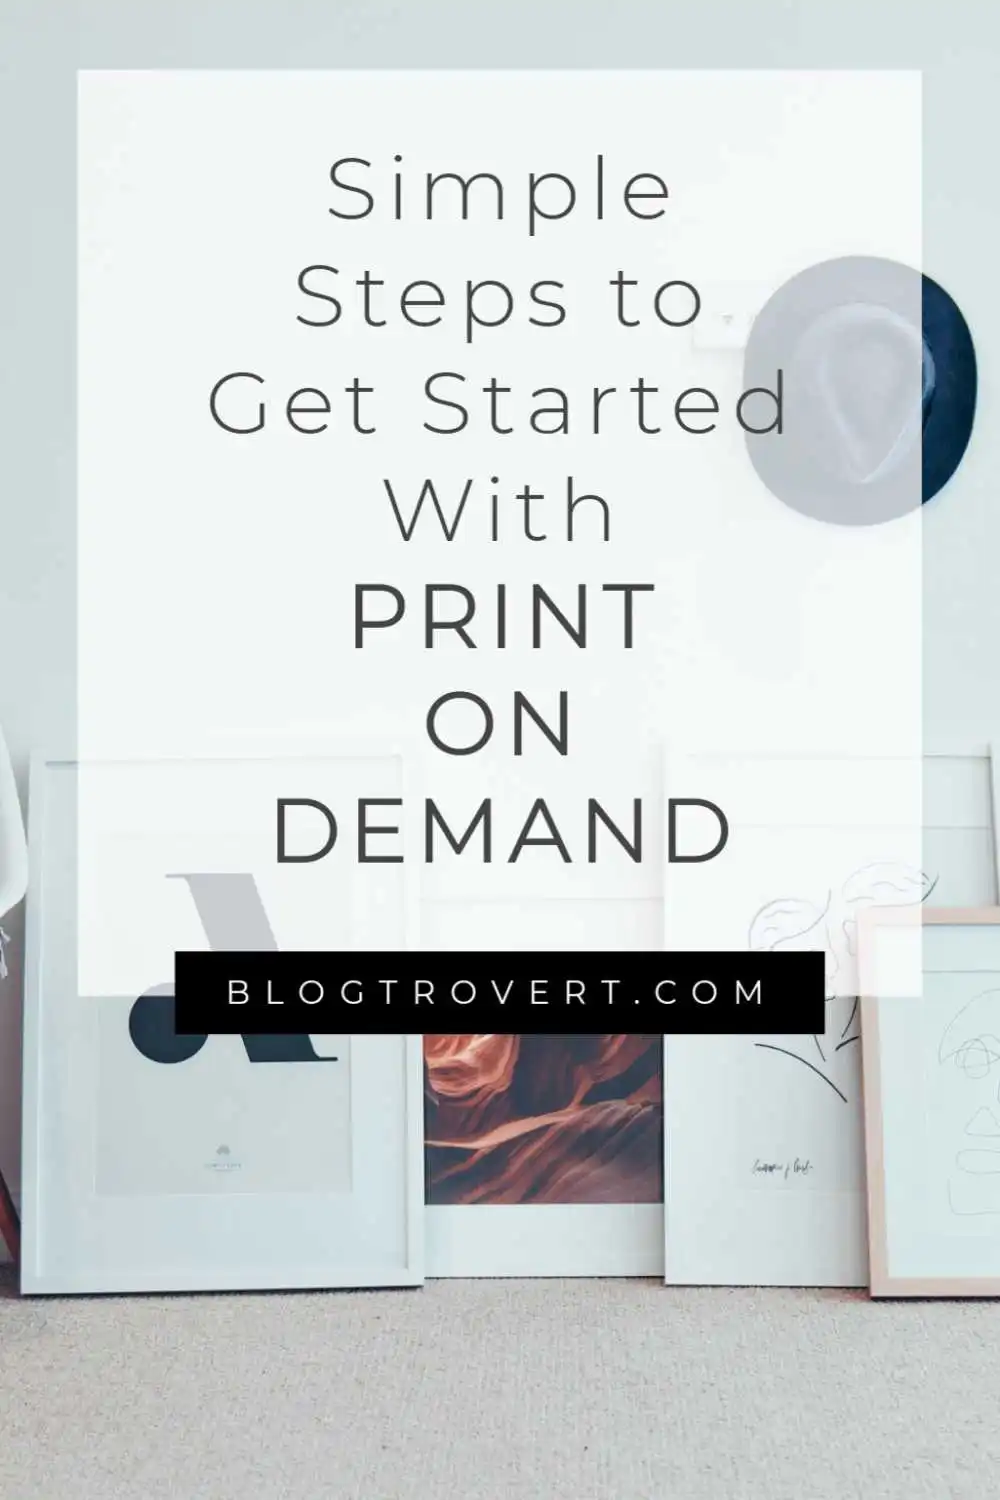 How To Start A Print On Demand Business in 11 Easy Steps 1